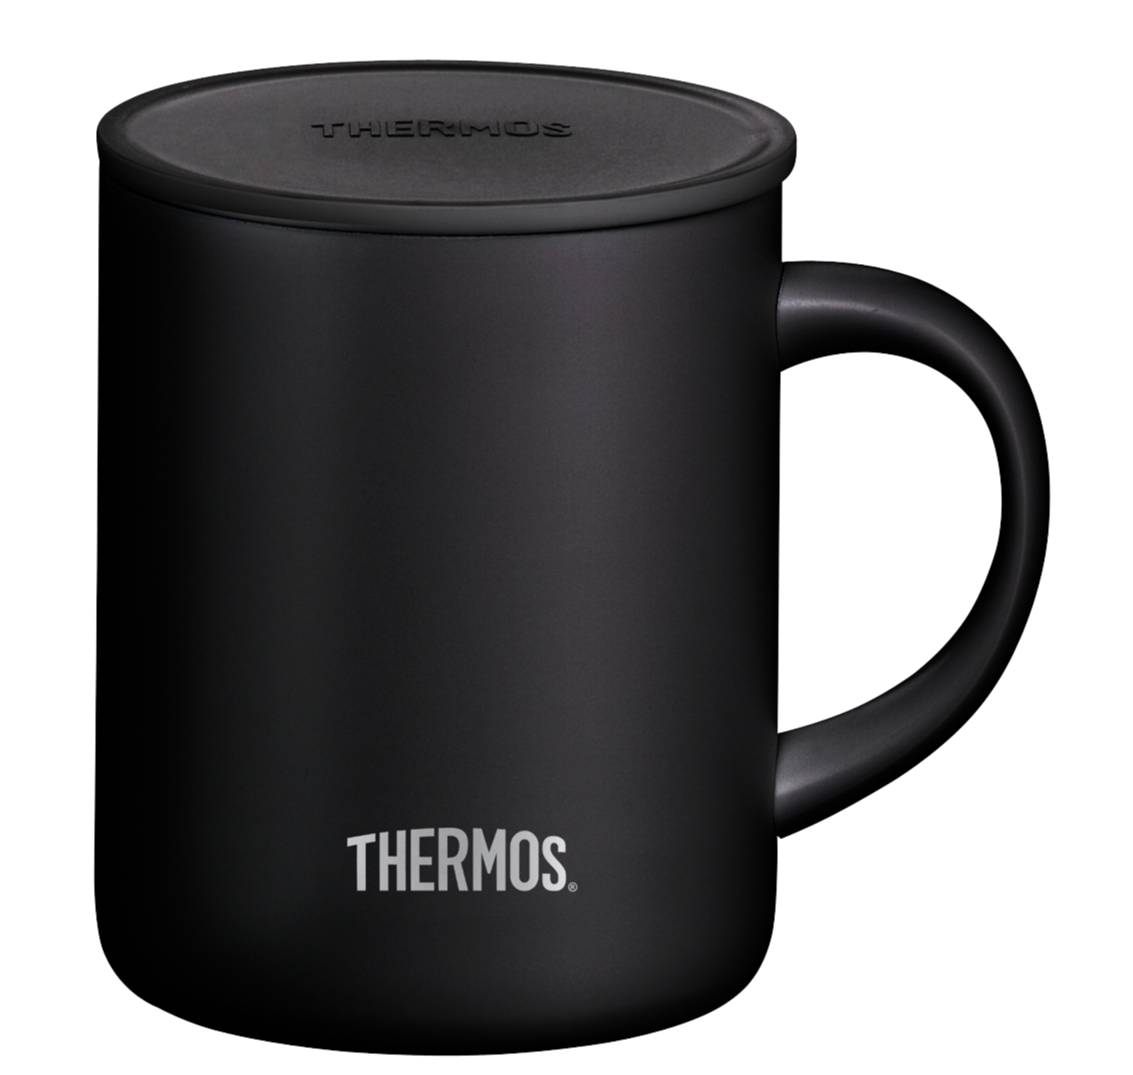 Longlife Cup Thermobecher 12 Oz 0 35 L Thermos